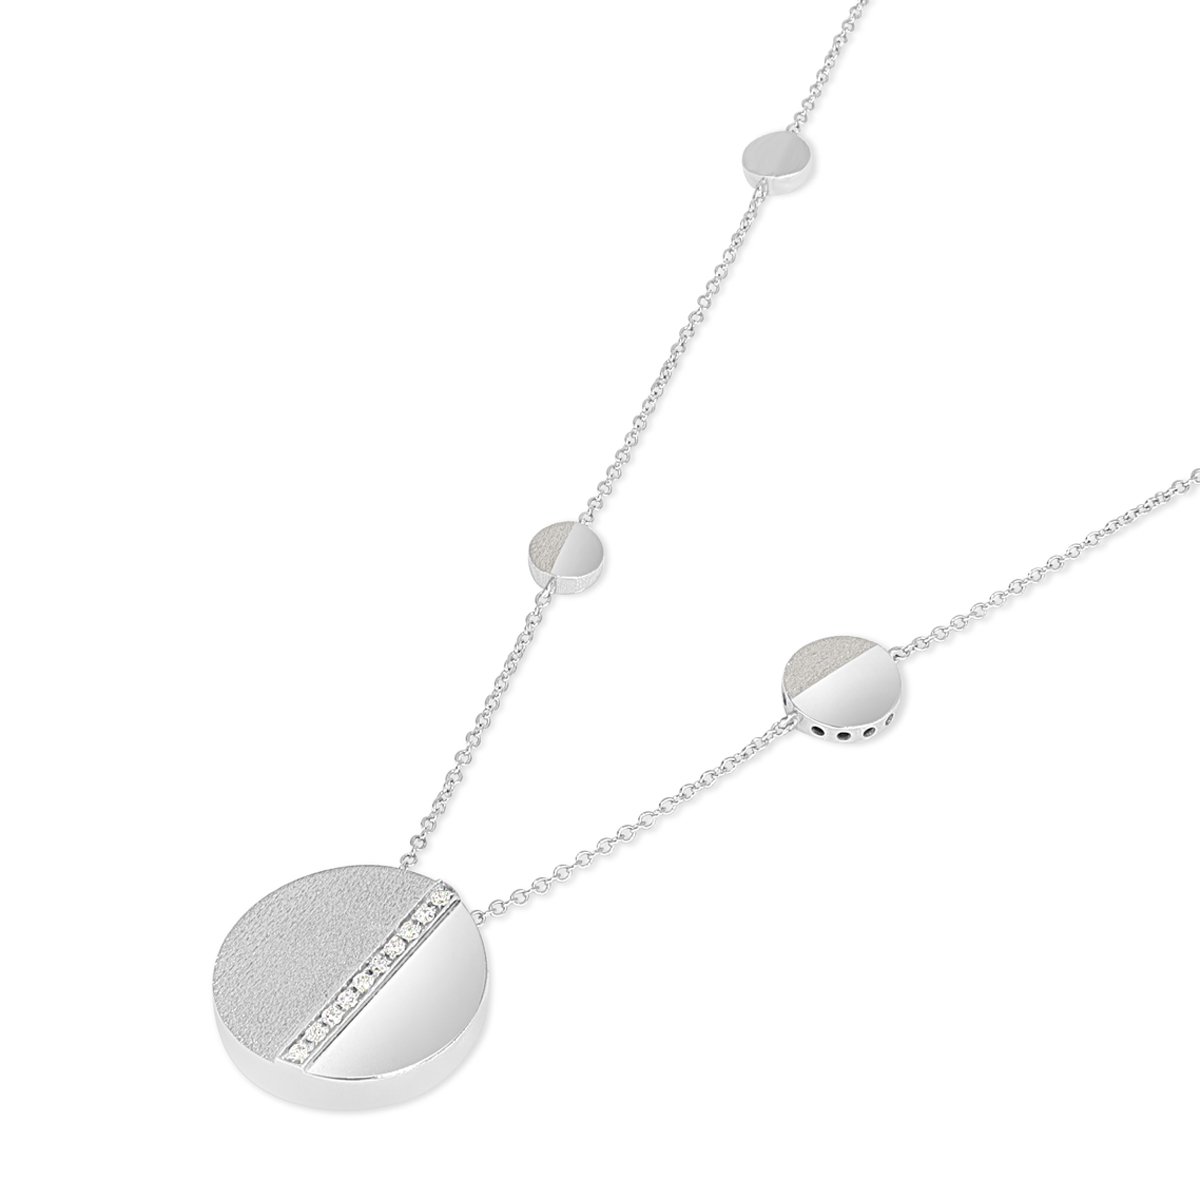 18 K White Gold Geometric Disk Necklace with Diamonds